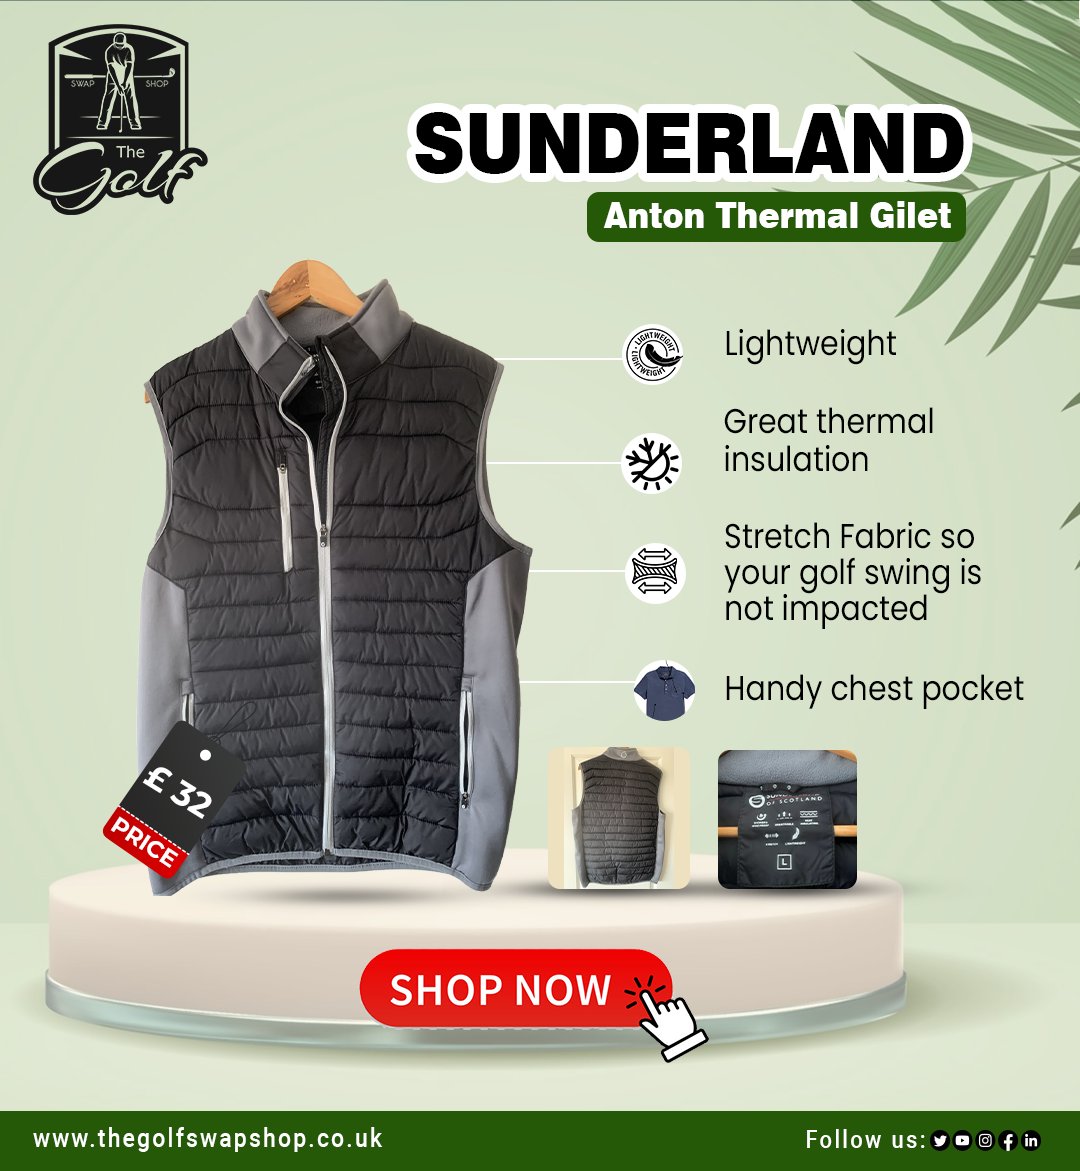 Brave the cold in style with the SUNDERLAND Anton Thermal Gilet, available now at The Golf Swap Shop!
thegolfswapshop.co.uk/product/golf-c…

#golf #golfer #golfing #golffashion #golfgilet #golfclothing #golfclothing #galvingreengolf #golfwearstore #golfcourse #sundarland #thegolfswapshop